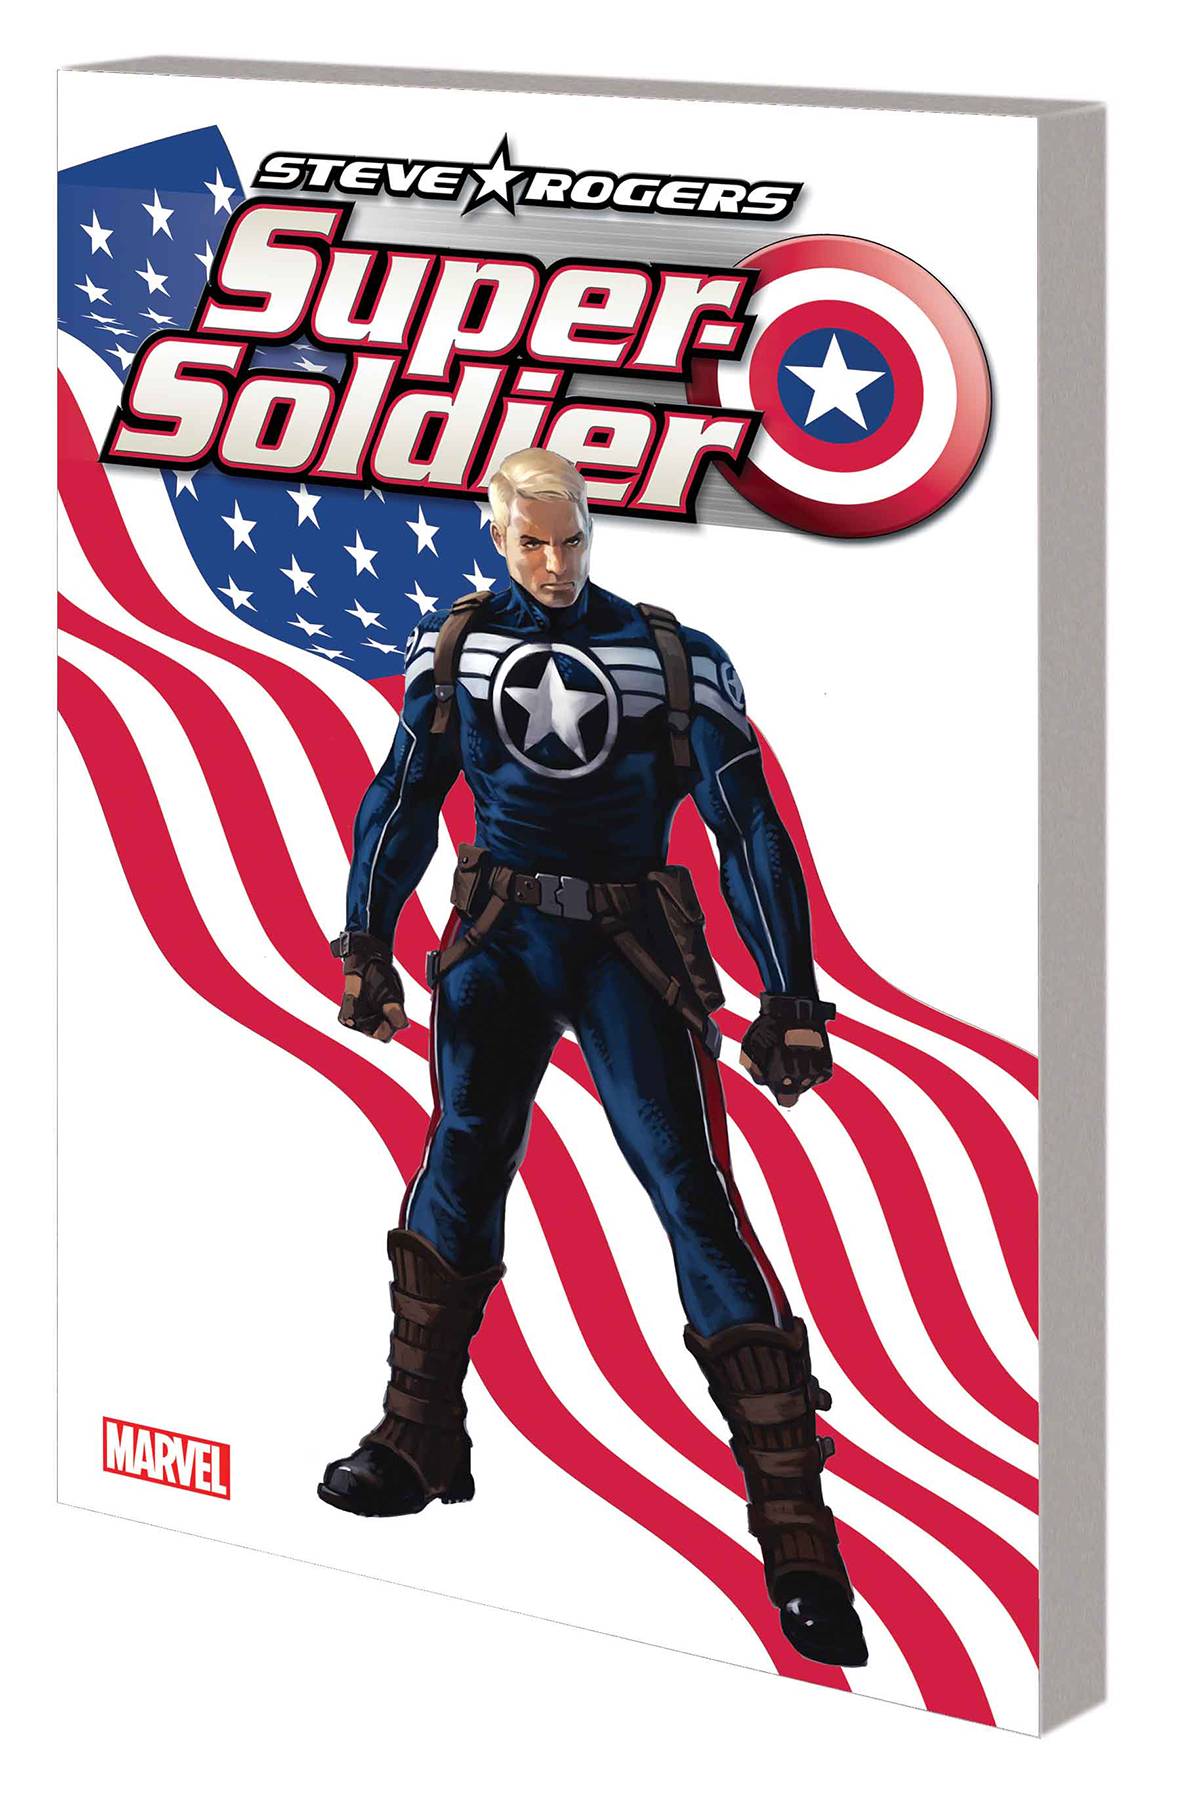 Steve Rogers Super Soldier Complete Collected Graphic Novel